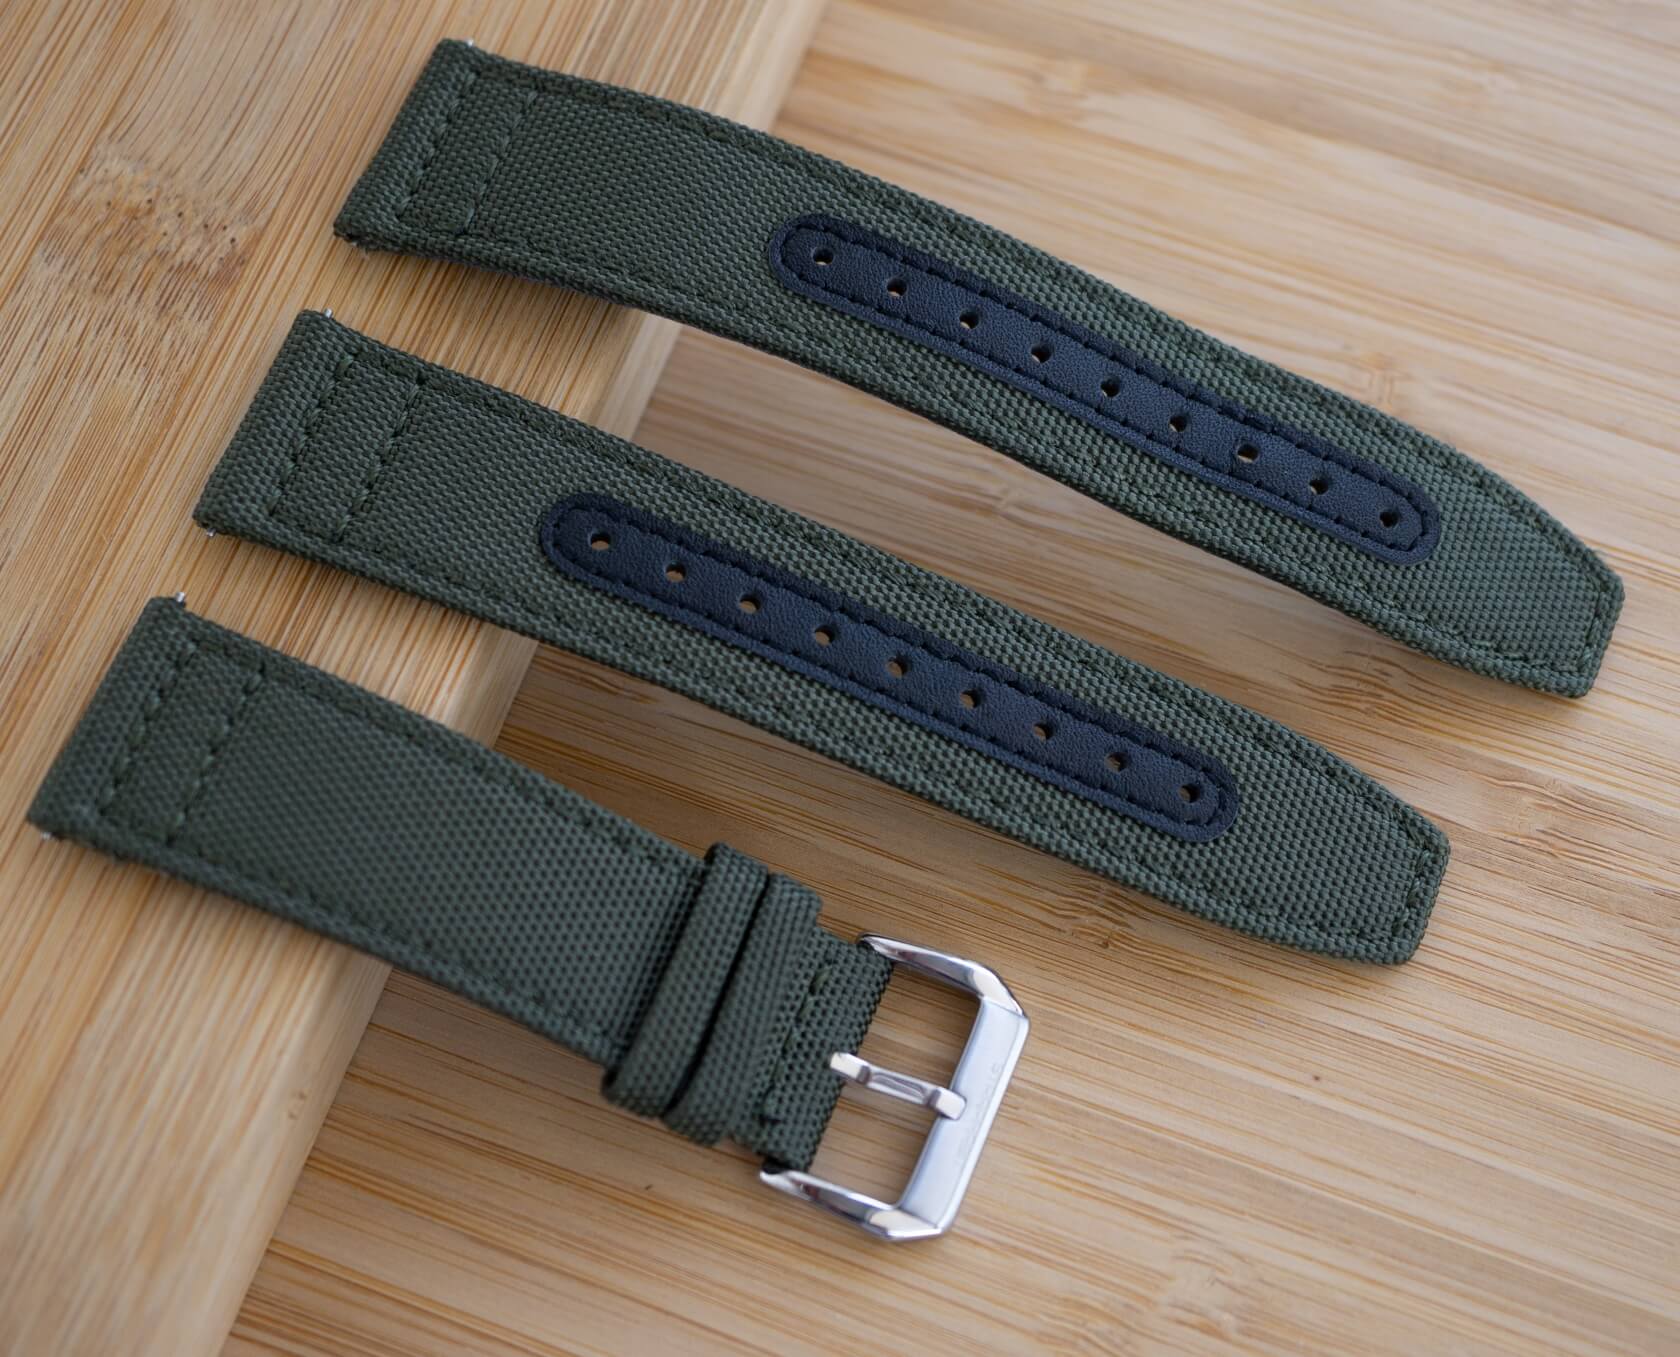 The sailcloth strap is delivered with both regular and long piece in the package